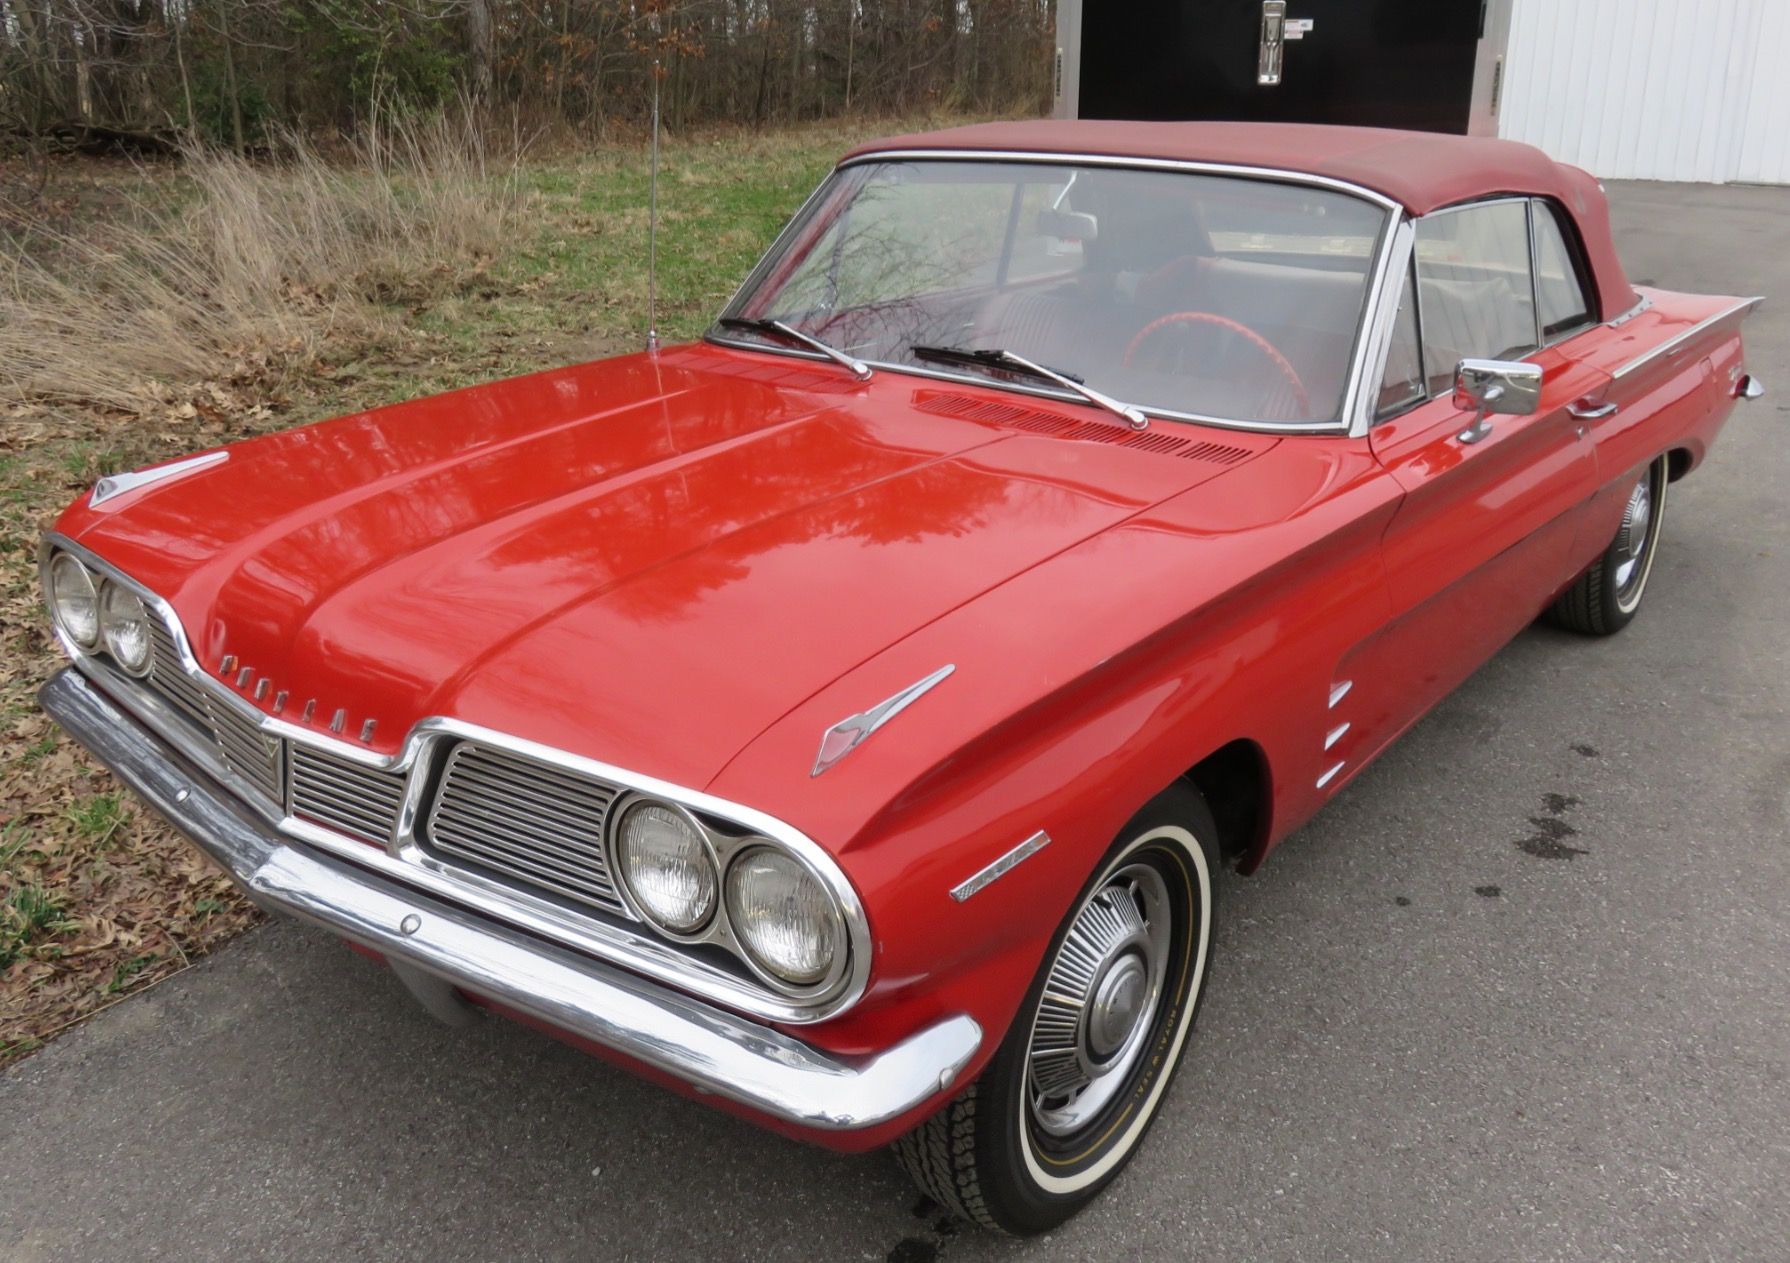 1962 Pontiac Tempest: The compact car that was unique in almost every way.